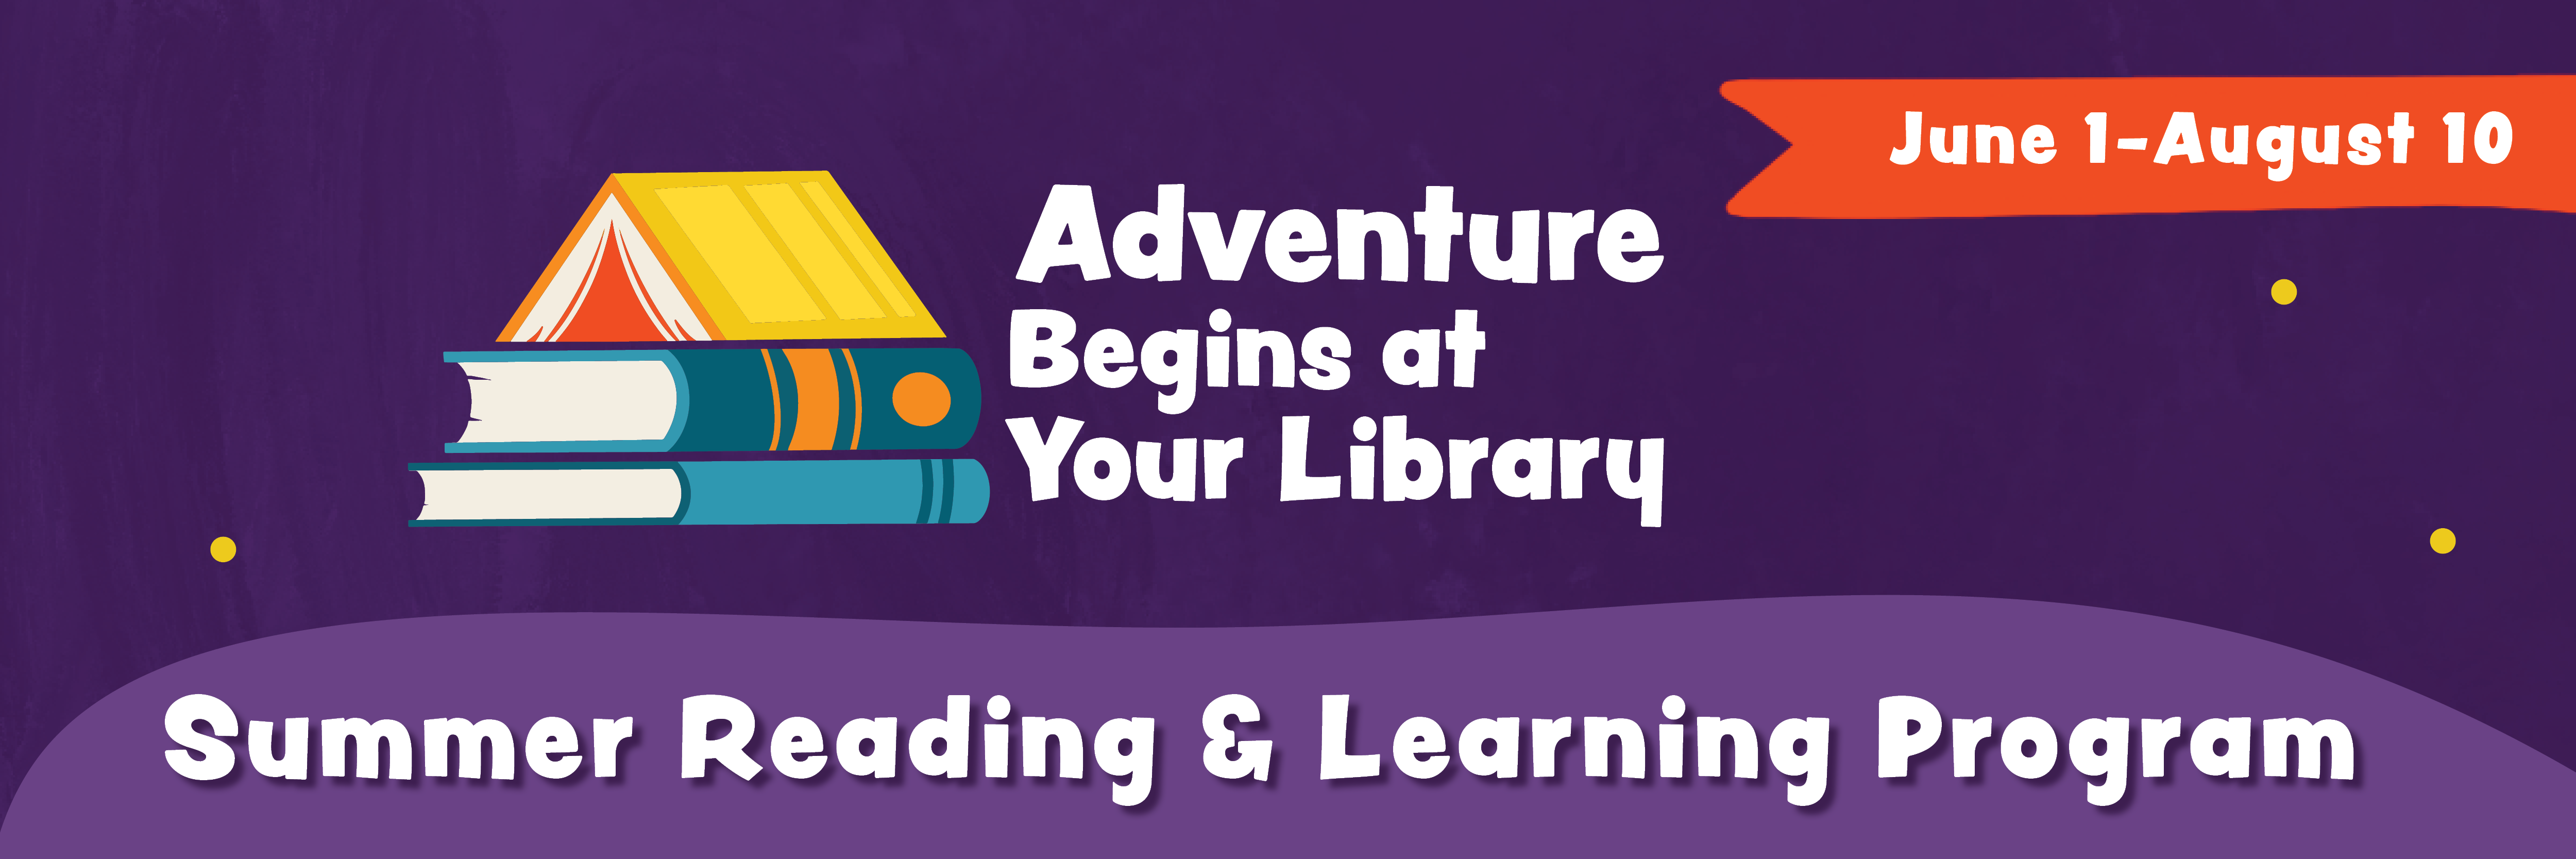 Adventure Begins at Your Library Summer Reading & Learning Program June 1 - August 10